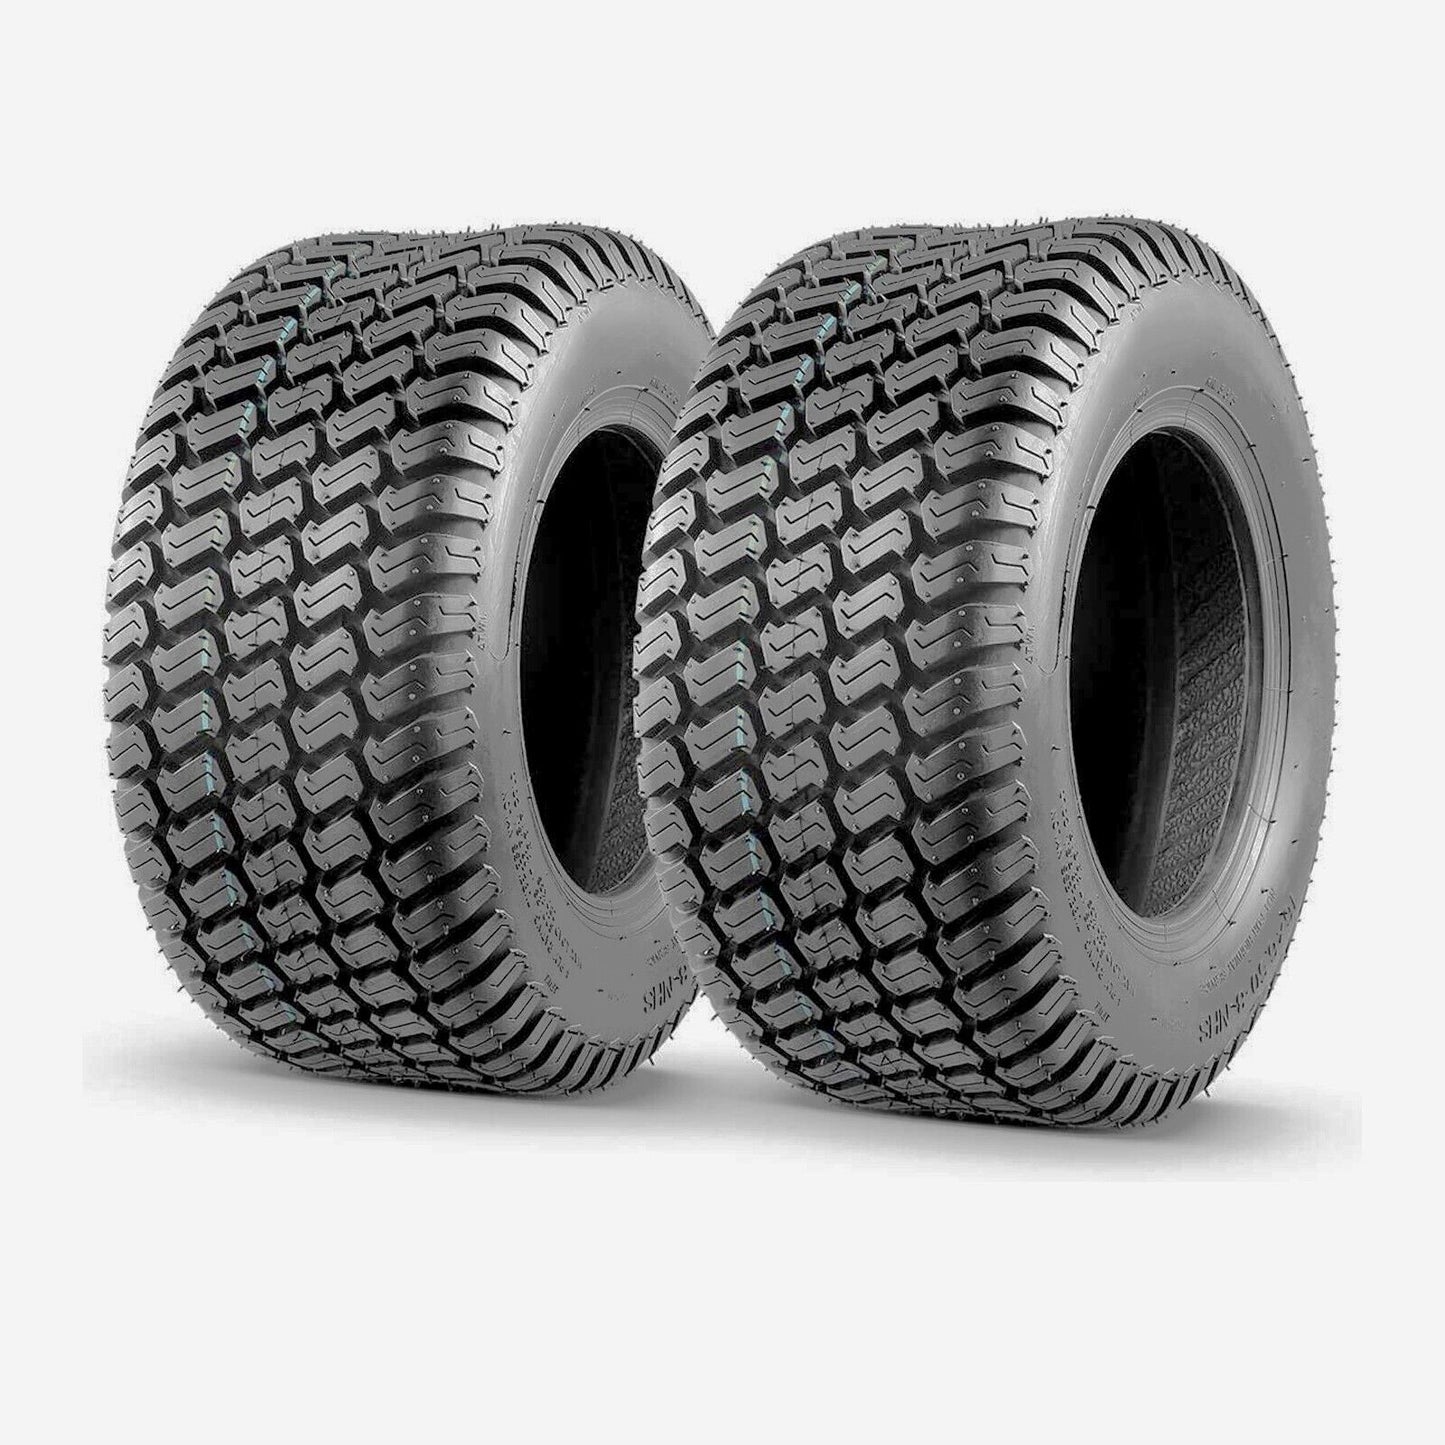 Pair of 16x6.50-8 8'' inch 4 Ply Tires